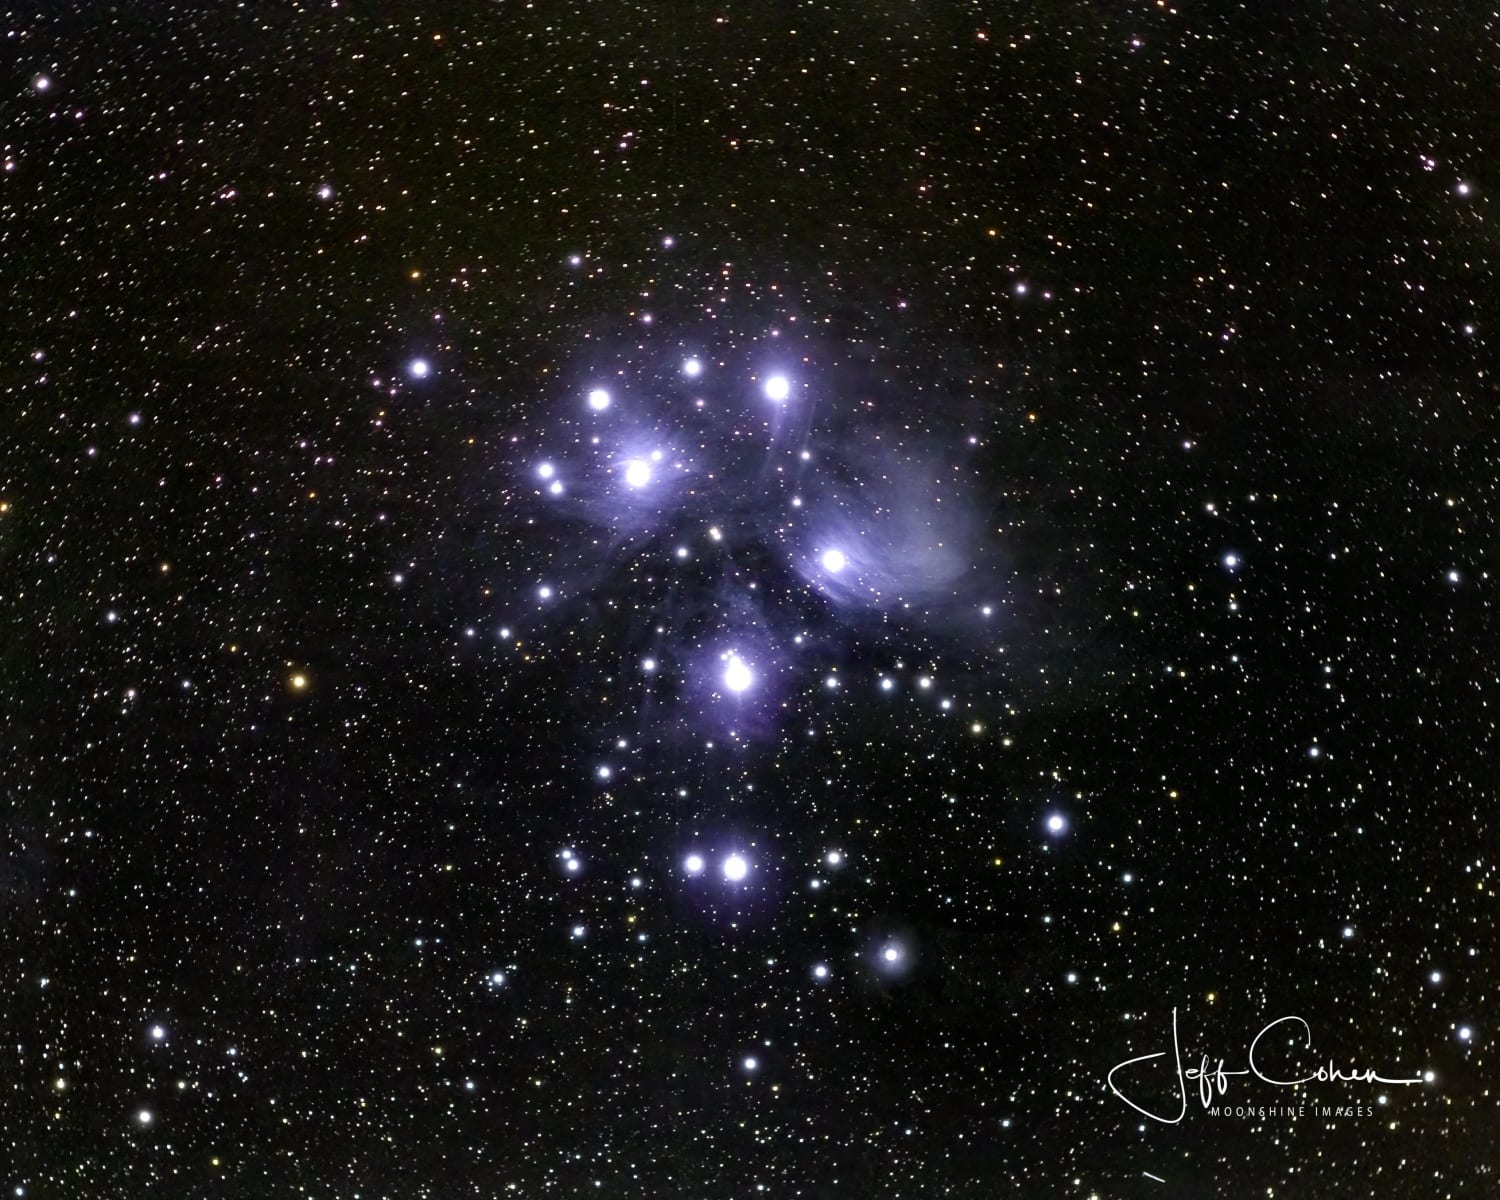 M45 the pleaides star cluster